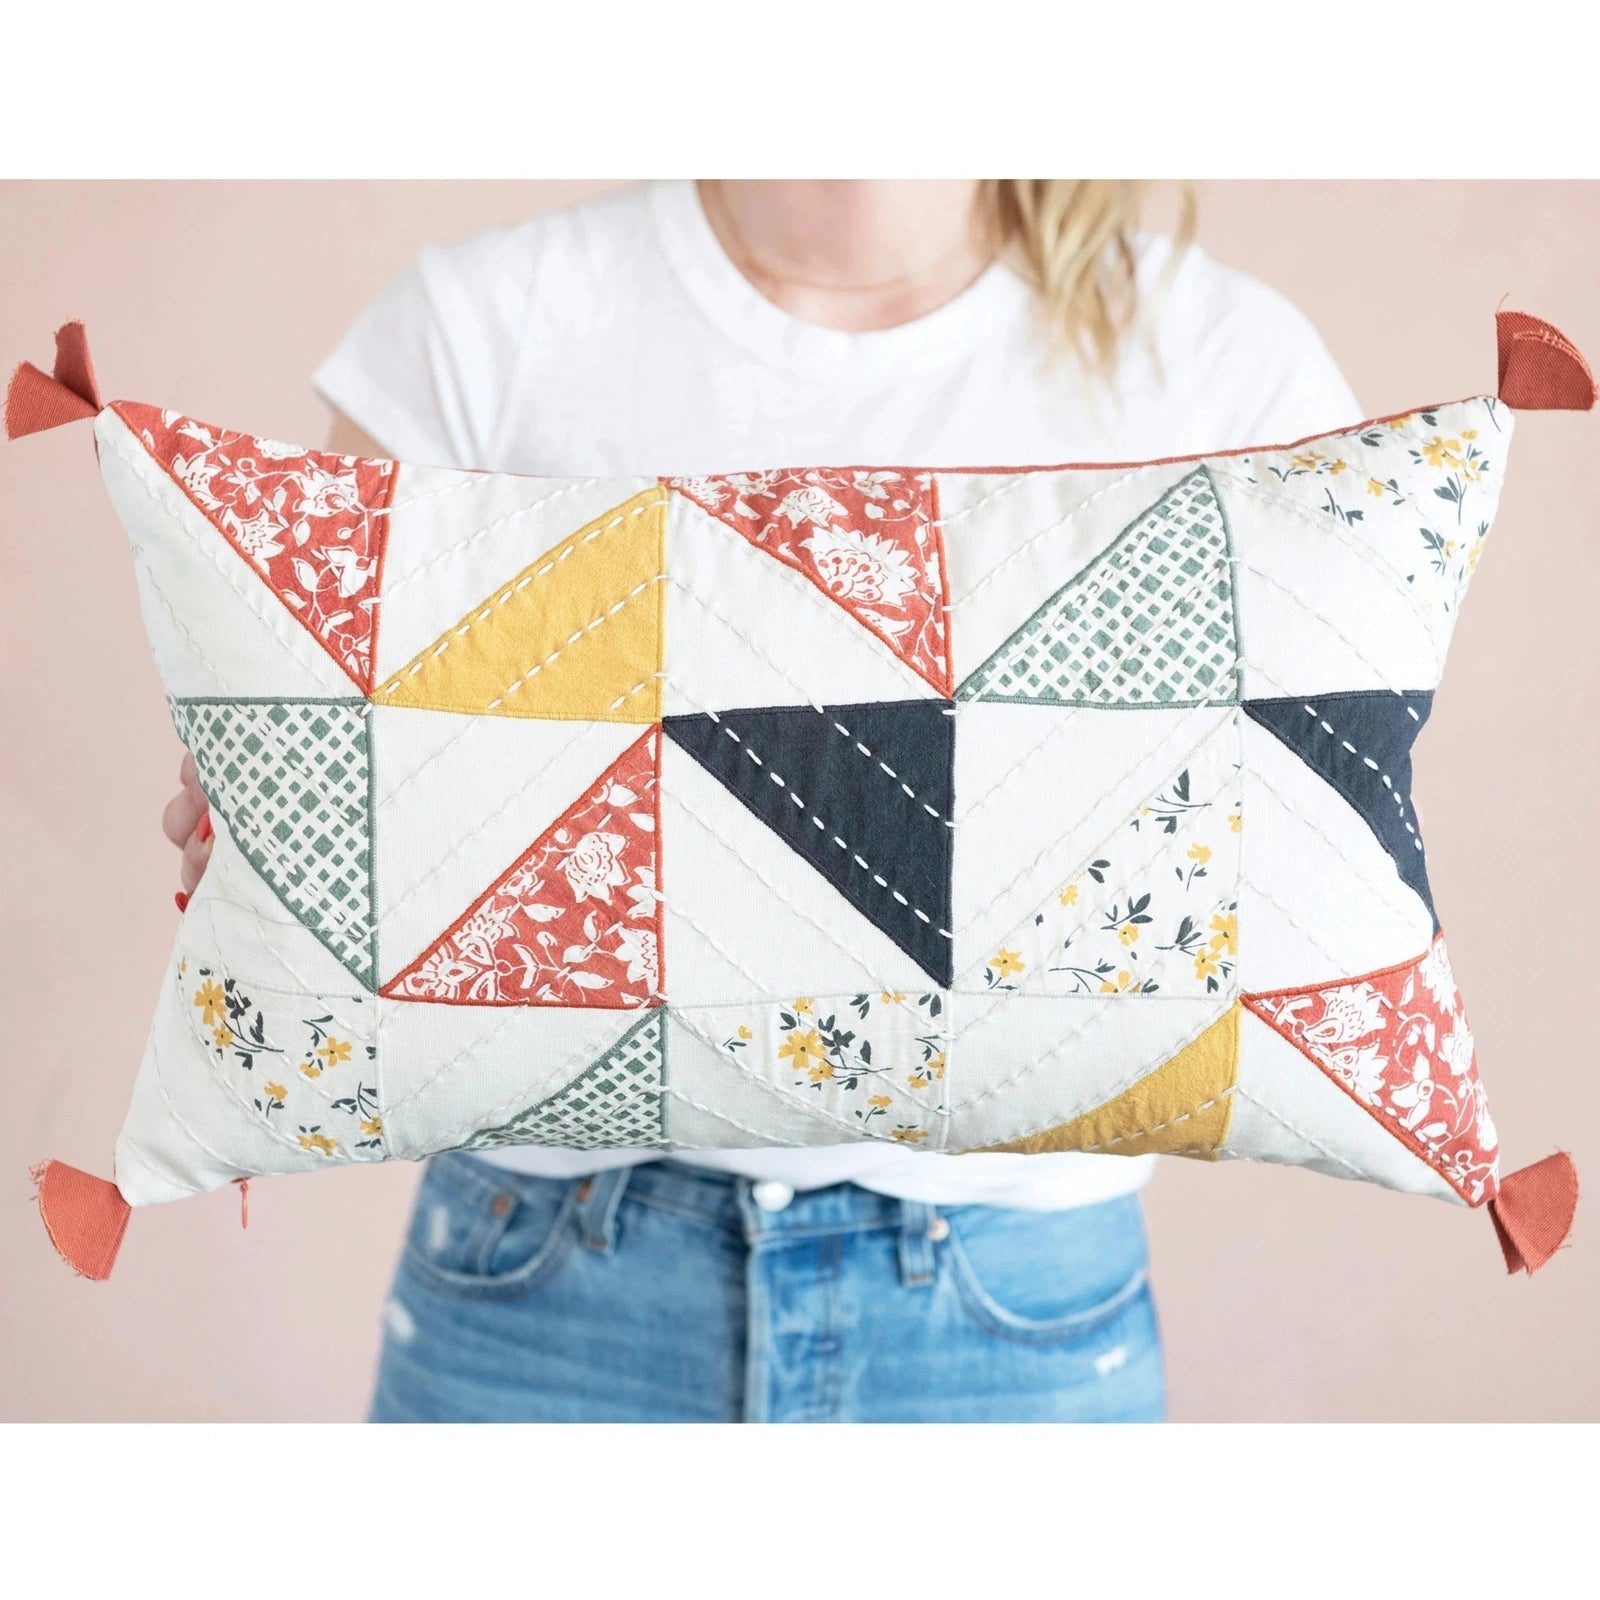 Patchwork Lumbar Pillow in Sky - Ethical Home Decor